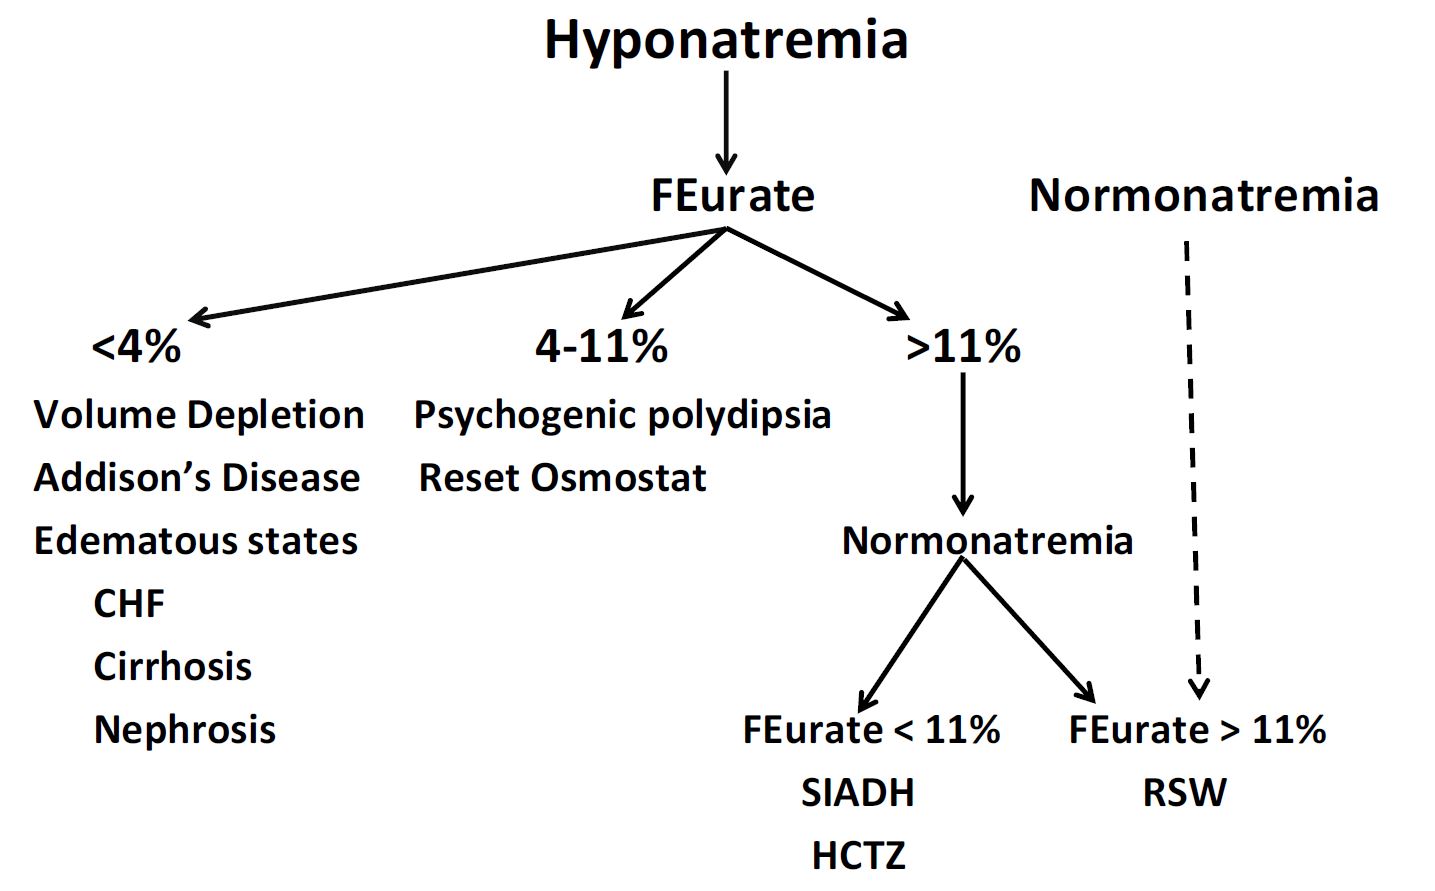 Based on this algorithm, a patient with hyponatremia should undergo correct...